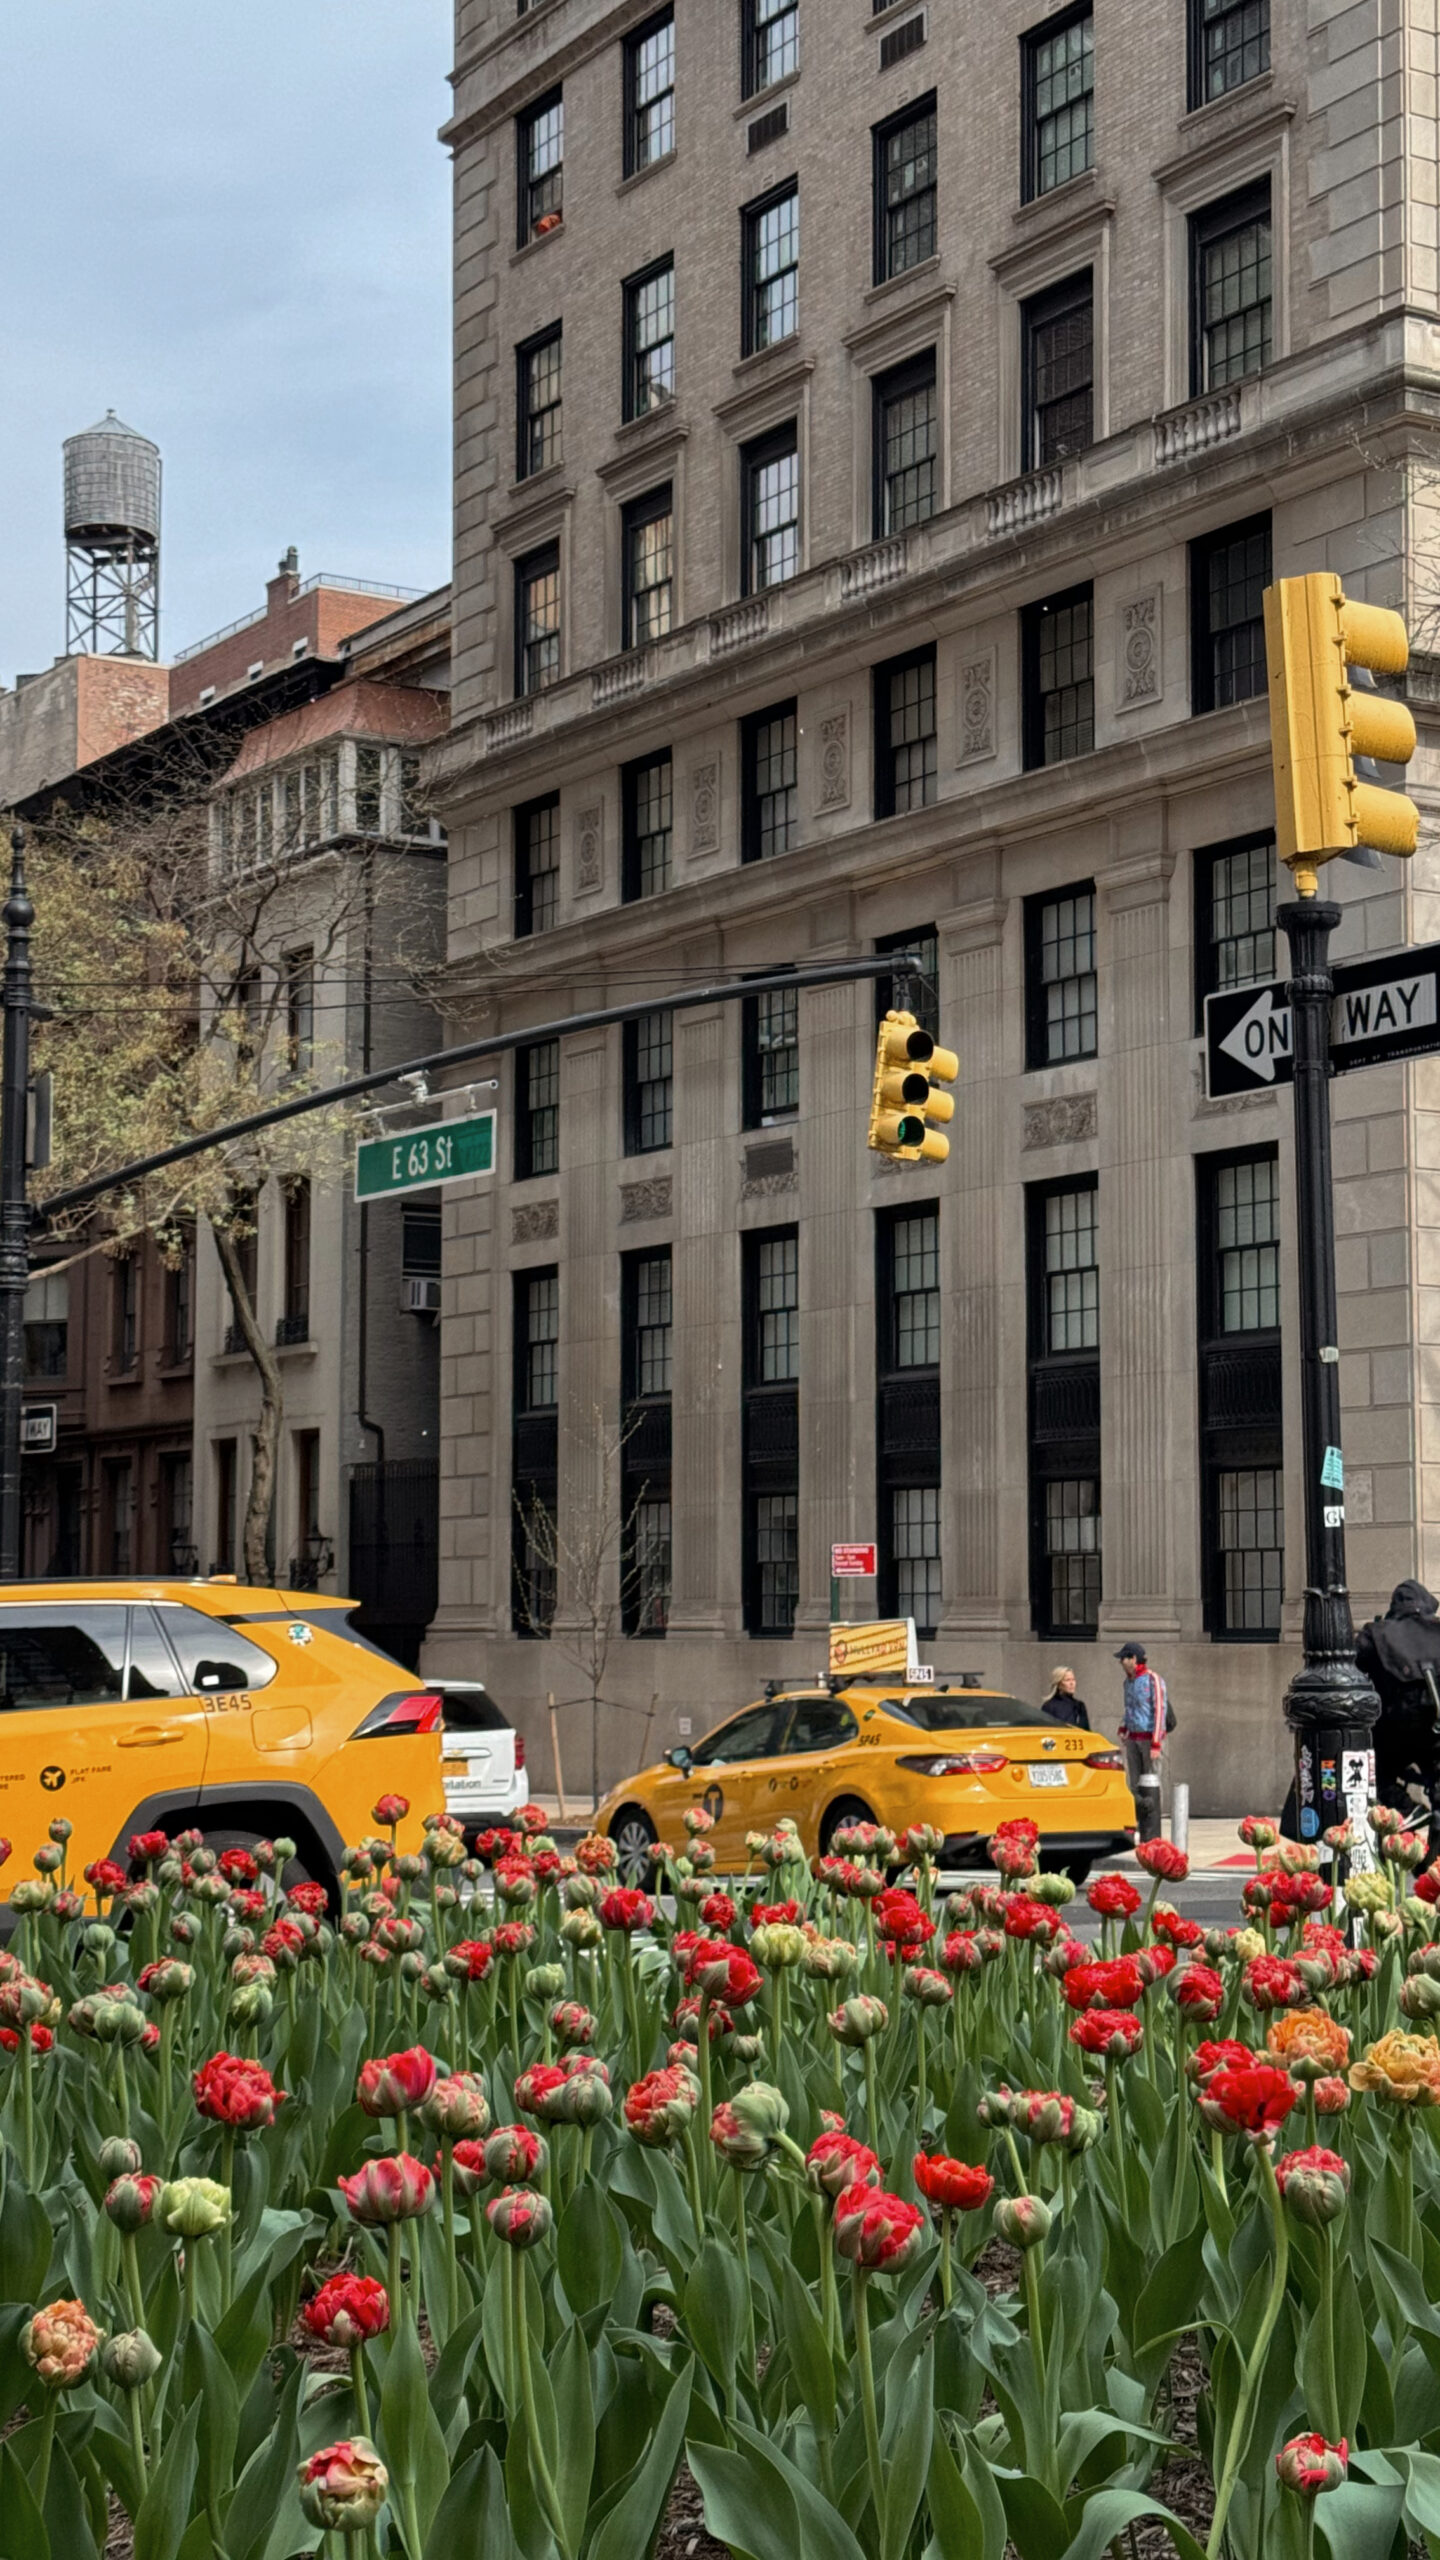 Park Avenue in New York City with red flowers and taxi cabs in the background